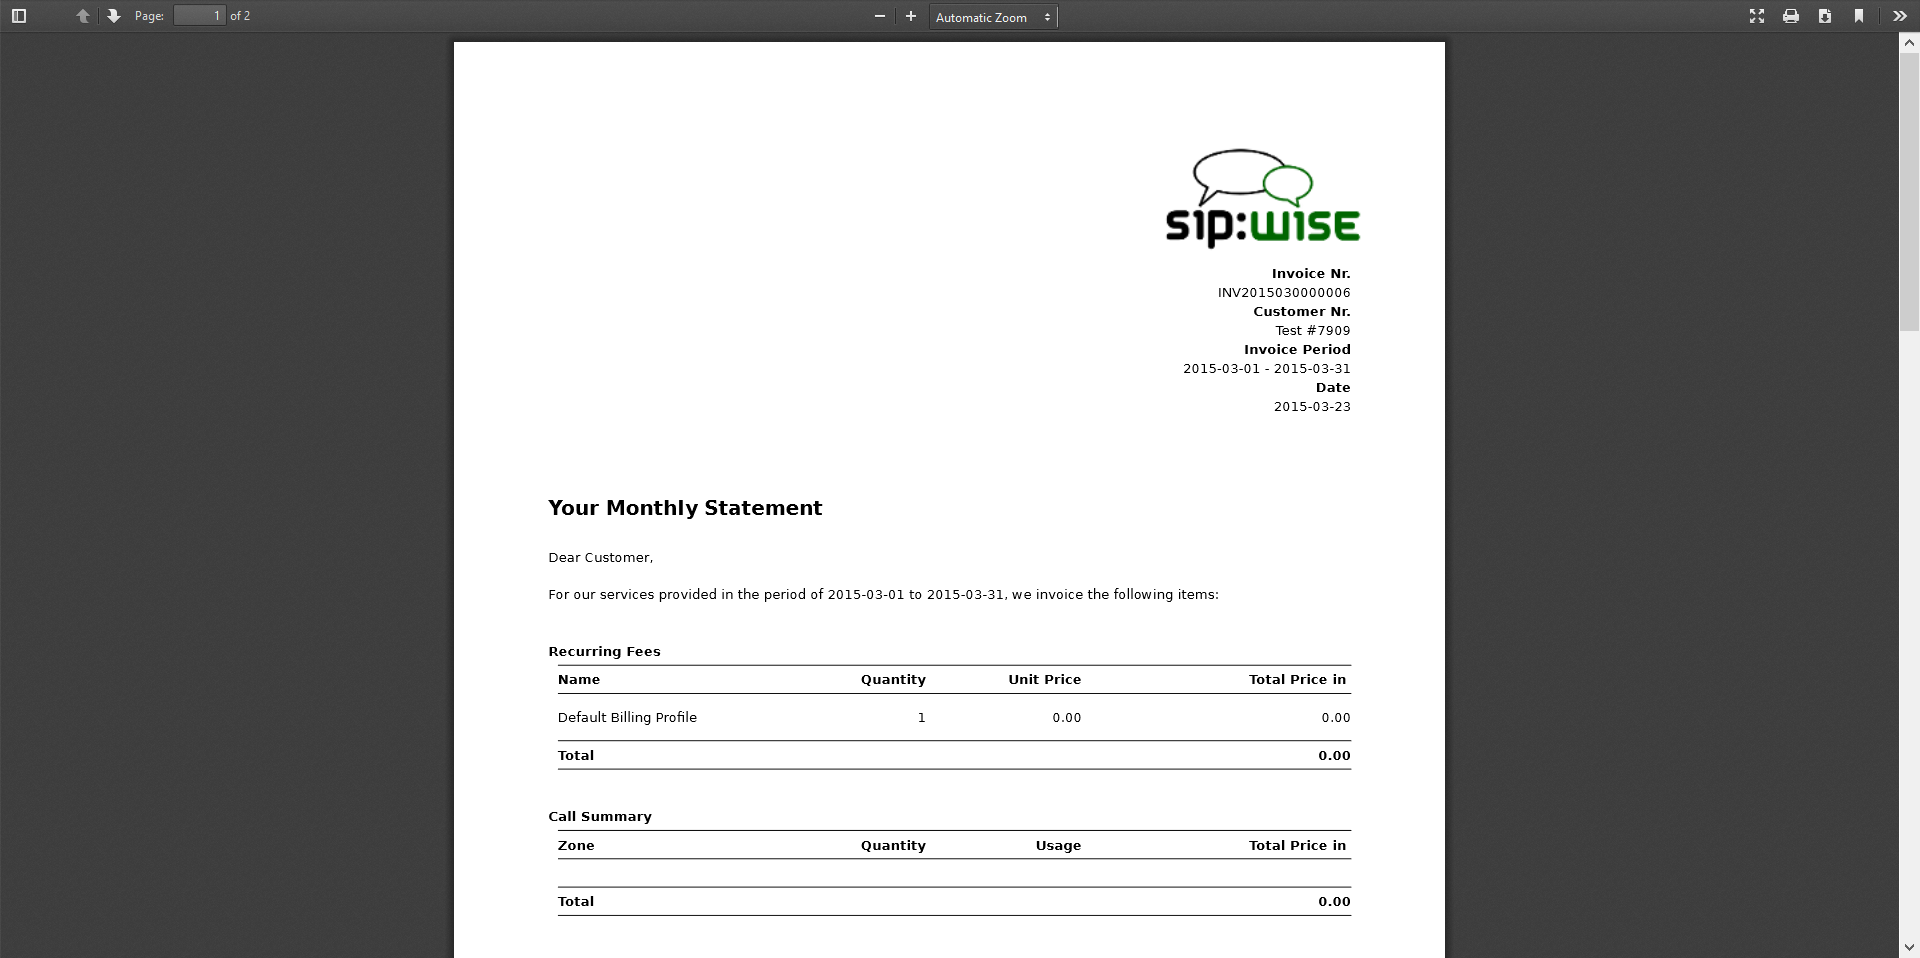 Invoice created view